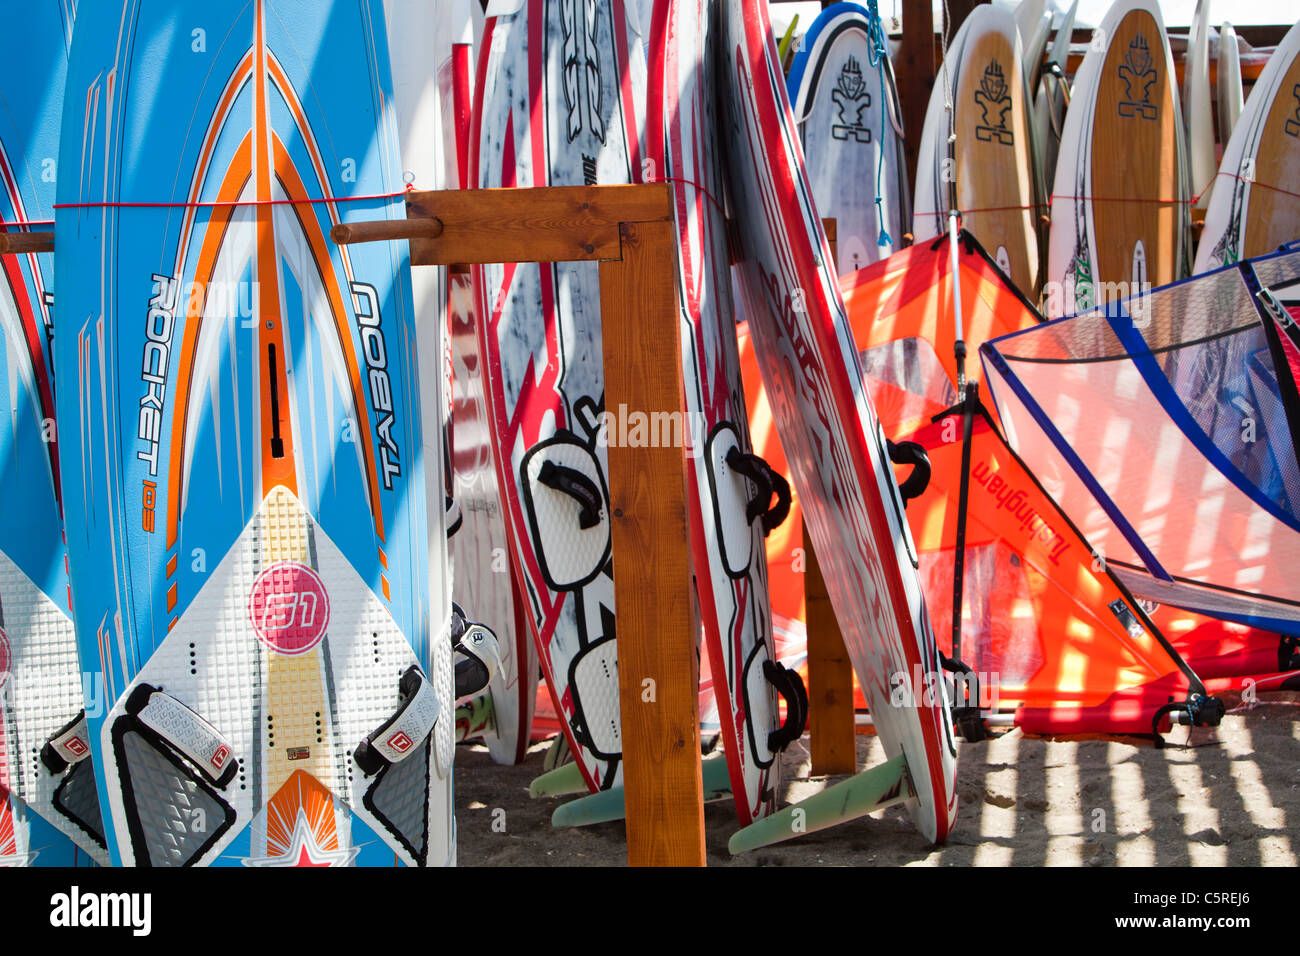 Windsurfing boards at an activity holiday centre in Skala Eresou, on Lesbos, Greece. Stock Photo